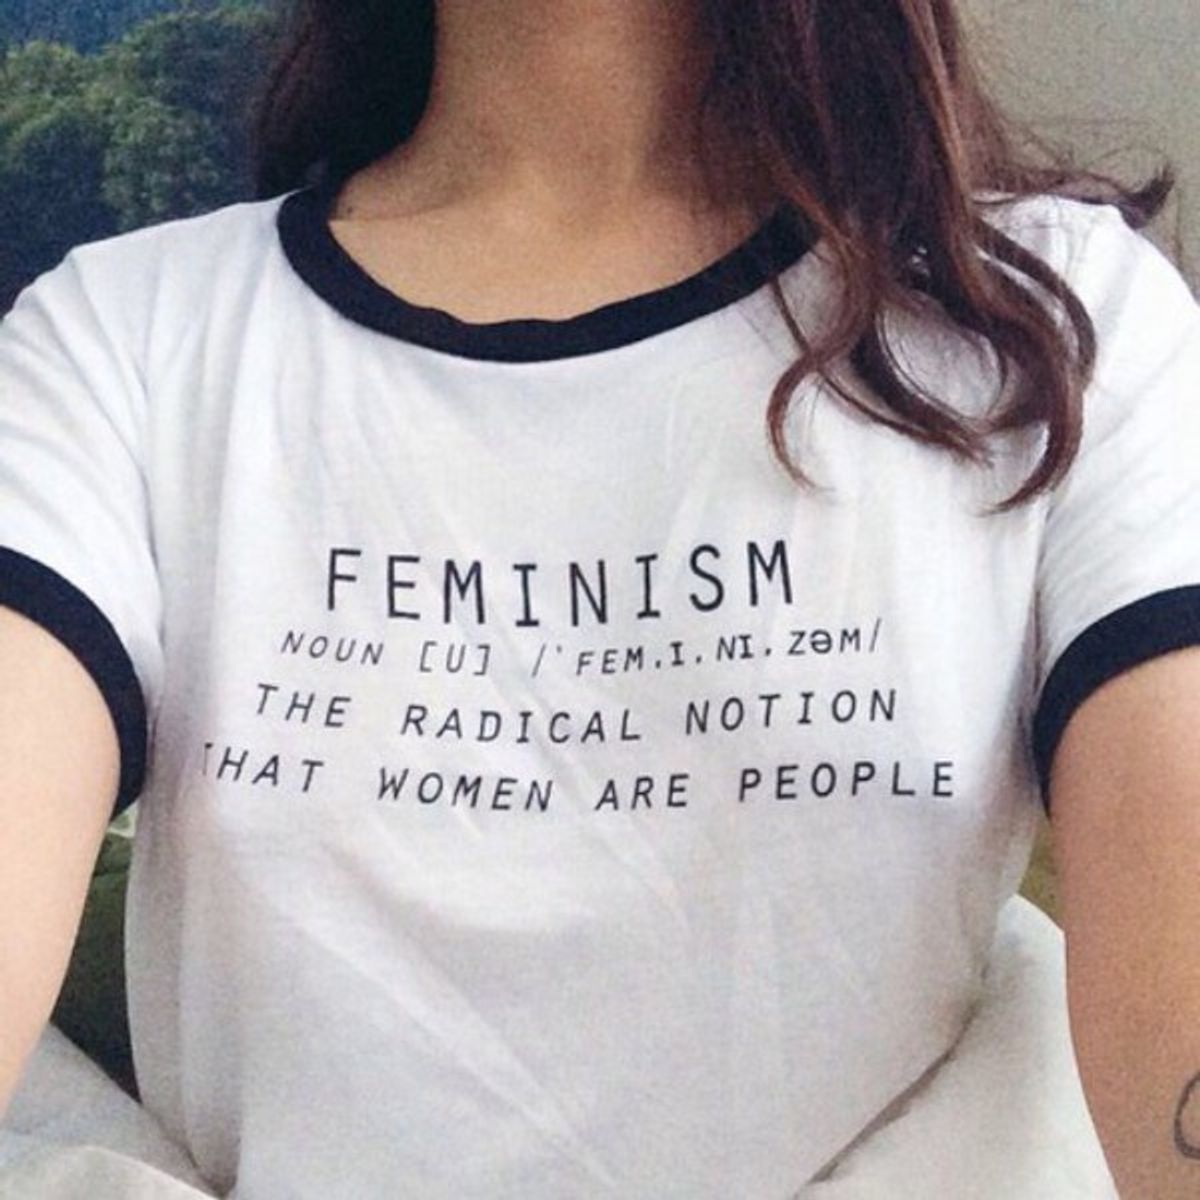 Is Feminism Becoming A Fashion Statement?